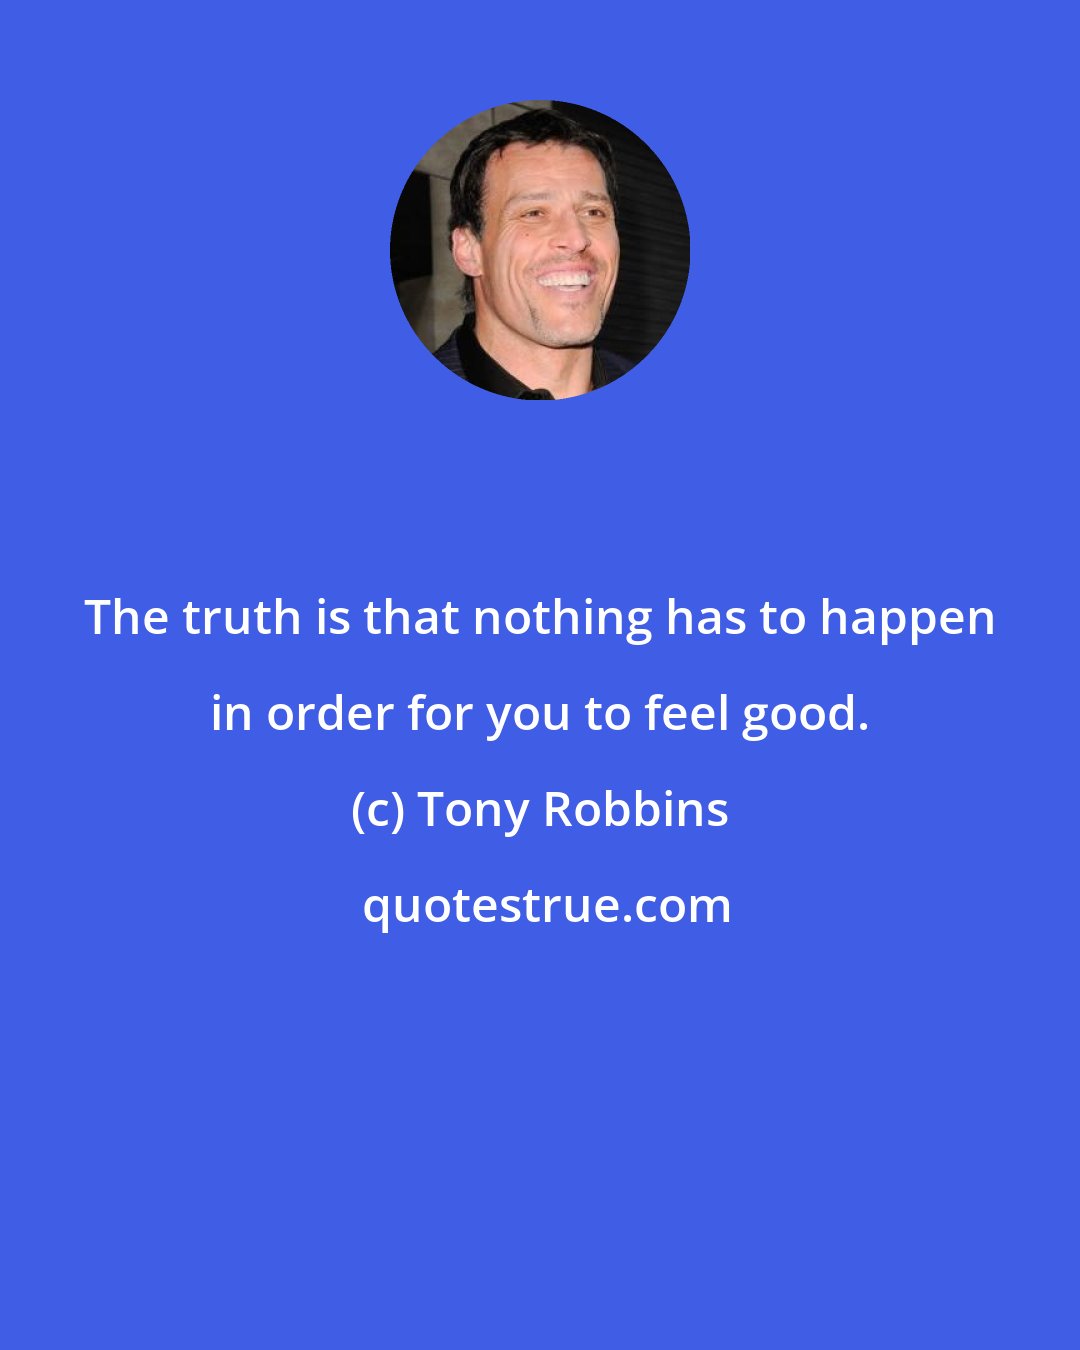 Tony Robbins: The truth is that nothing has to happen in order for you to feel good.